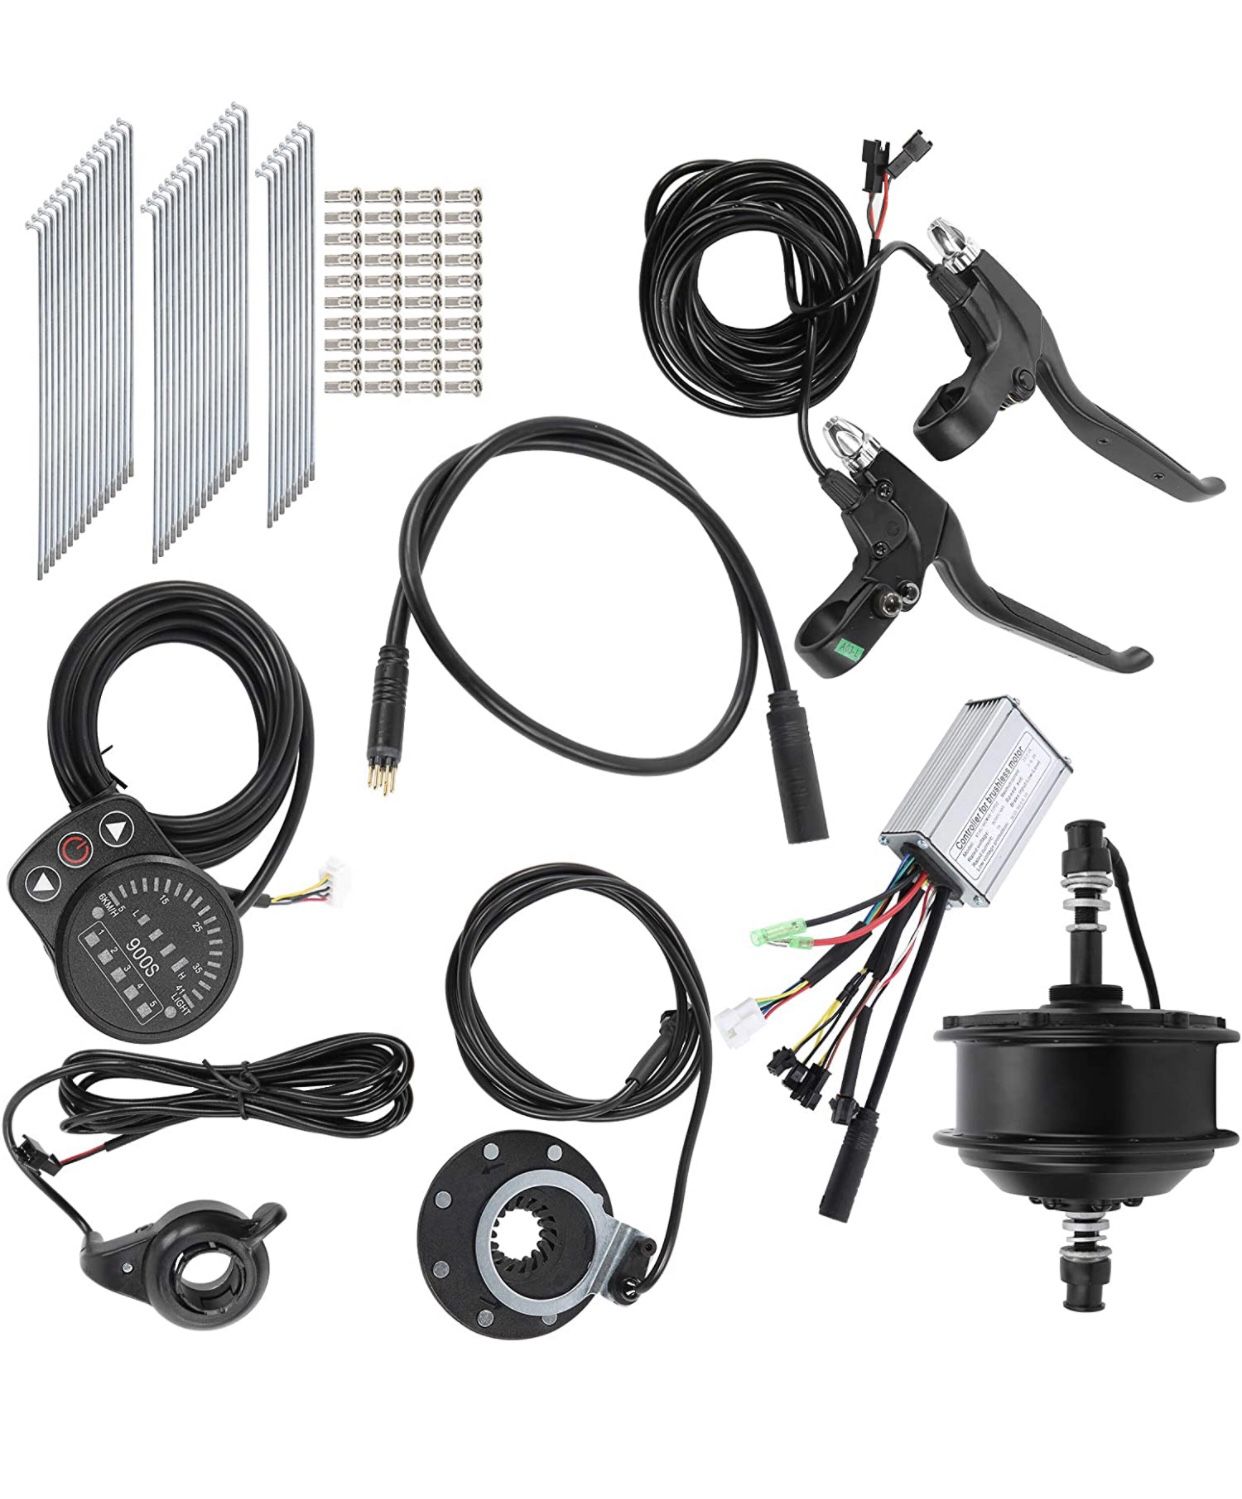 NEW! E-Bike Conversion Kit, 36V 250W Electronic Bicycle Conversion Kit Brushless Hub Motor Kit Front/Rear Wheels with KT‑900S Meter for 24in 12G Wheel